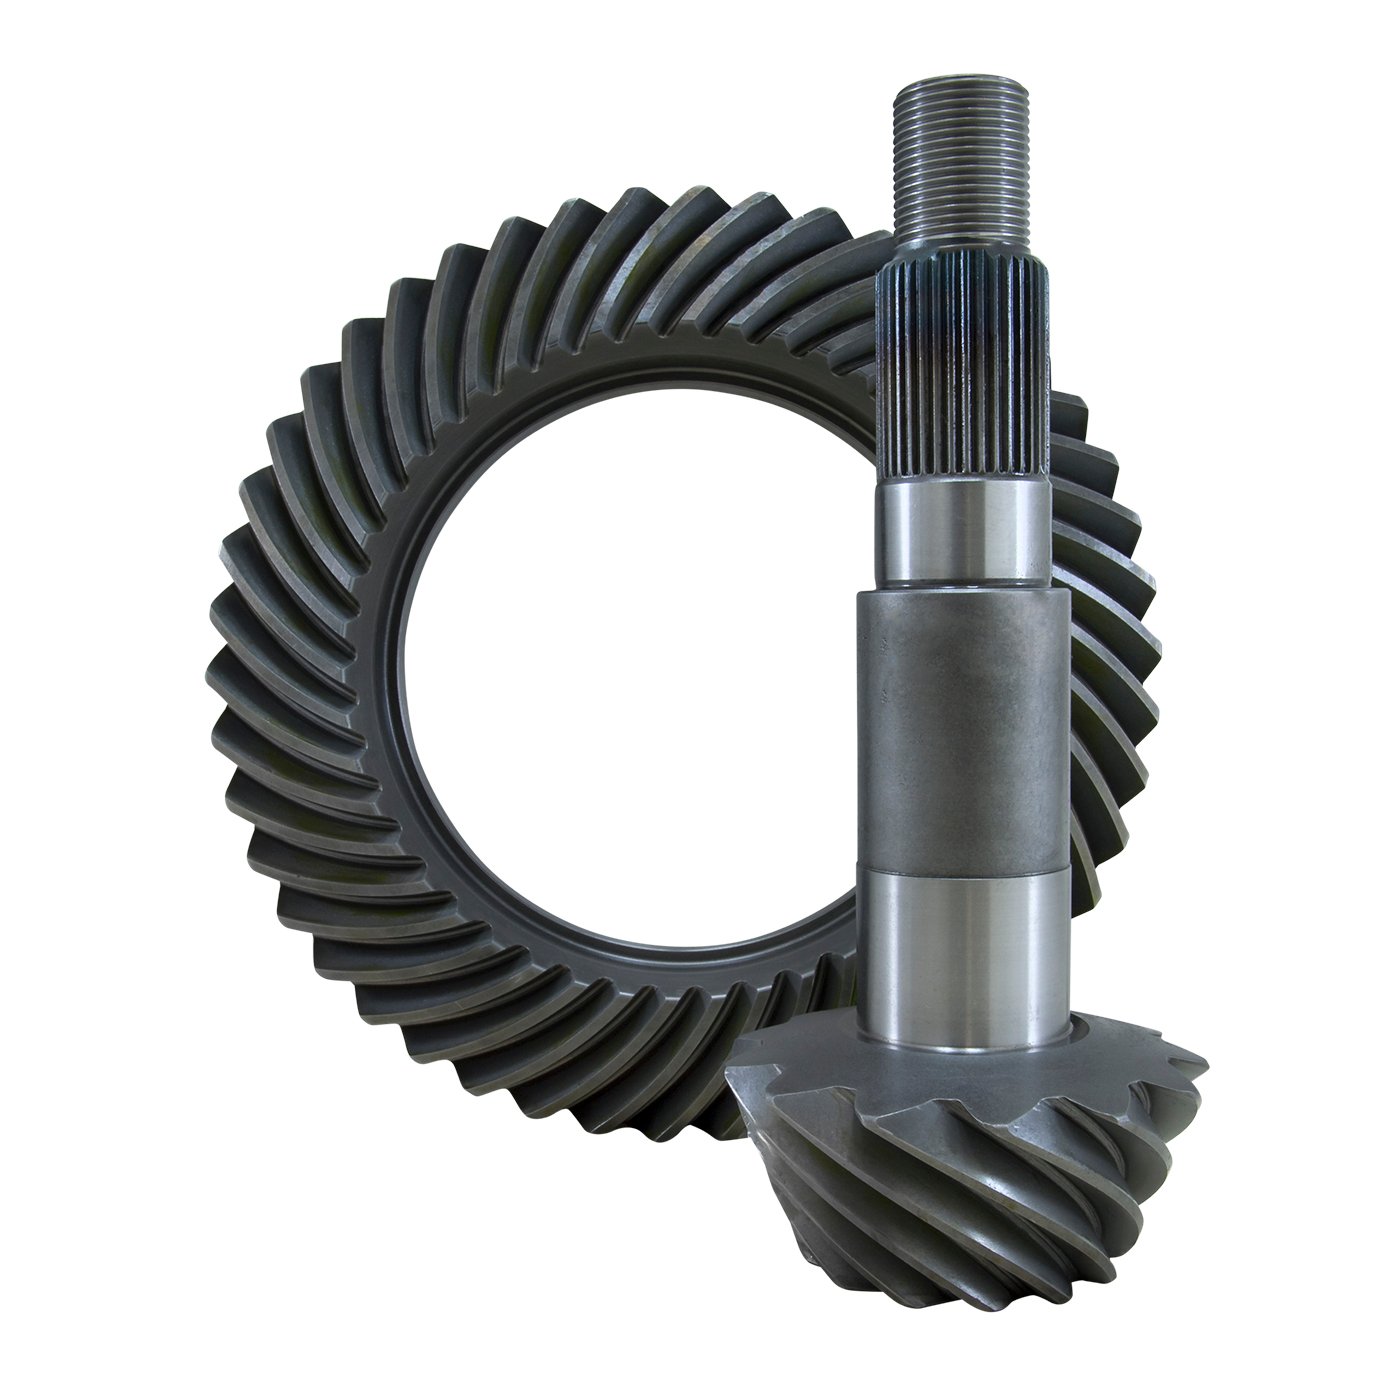 USA Standard ZG D80-354 Replacement Ring & Pinion Gear Set, For Dana 80, 3.54 Ratio